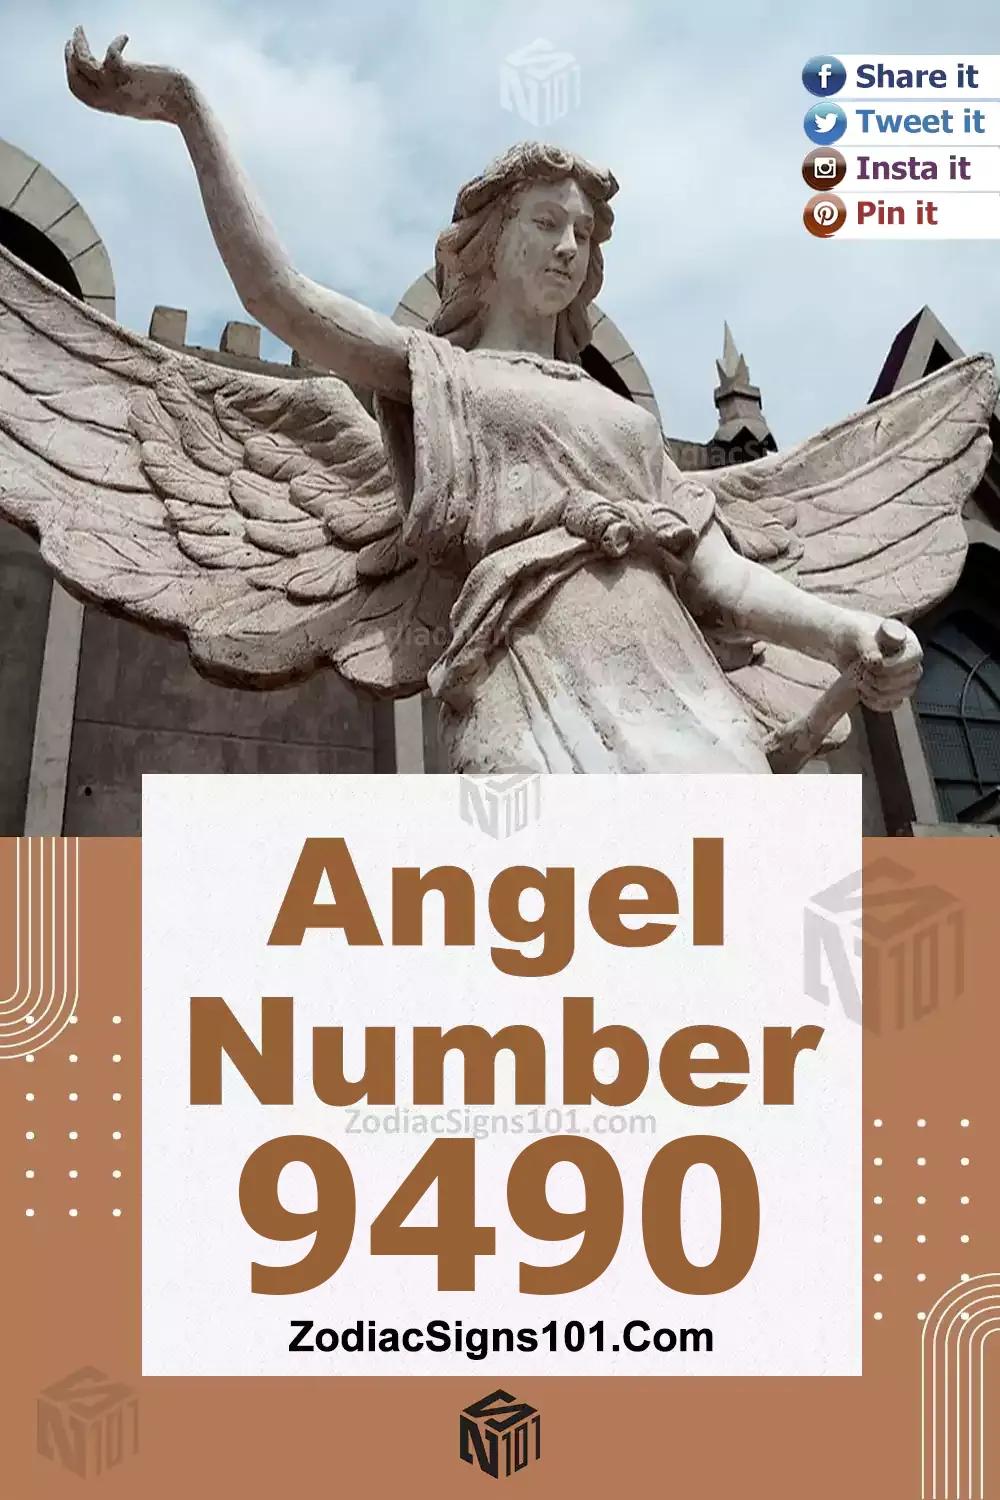 9490 Angel Number Meaning